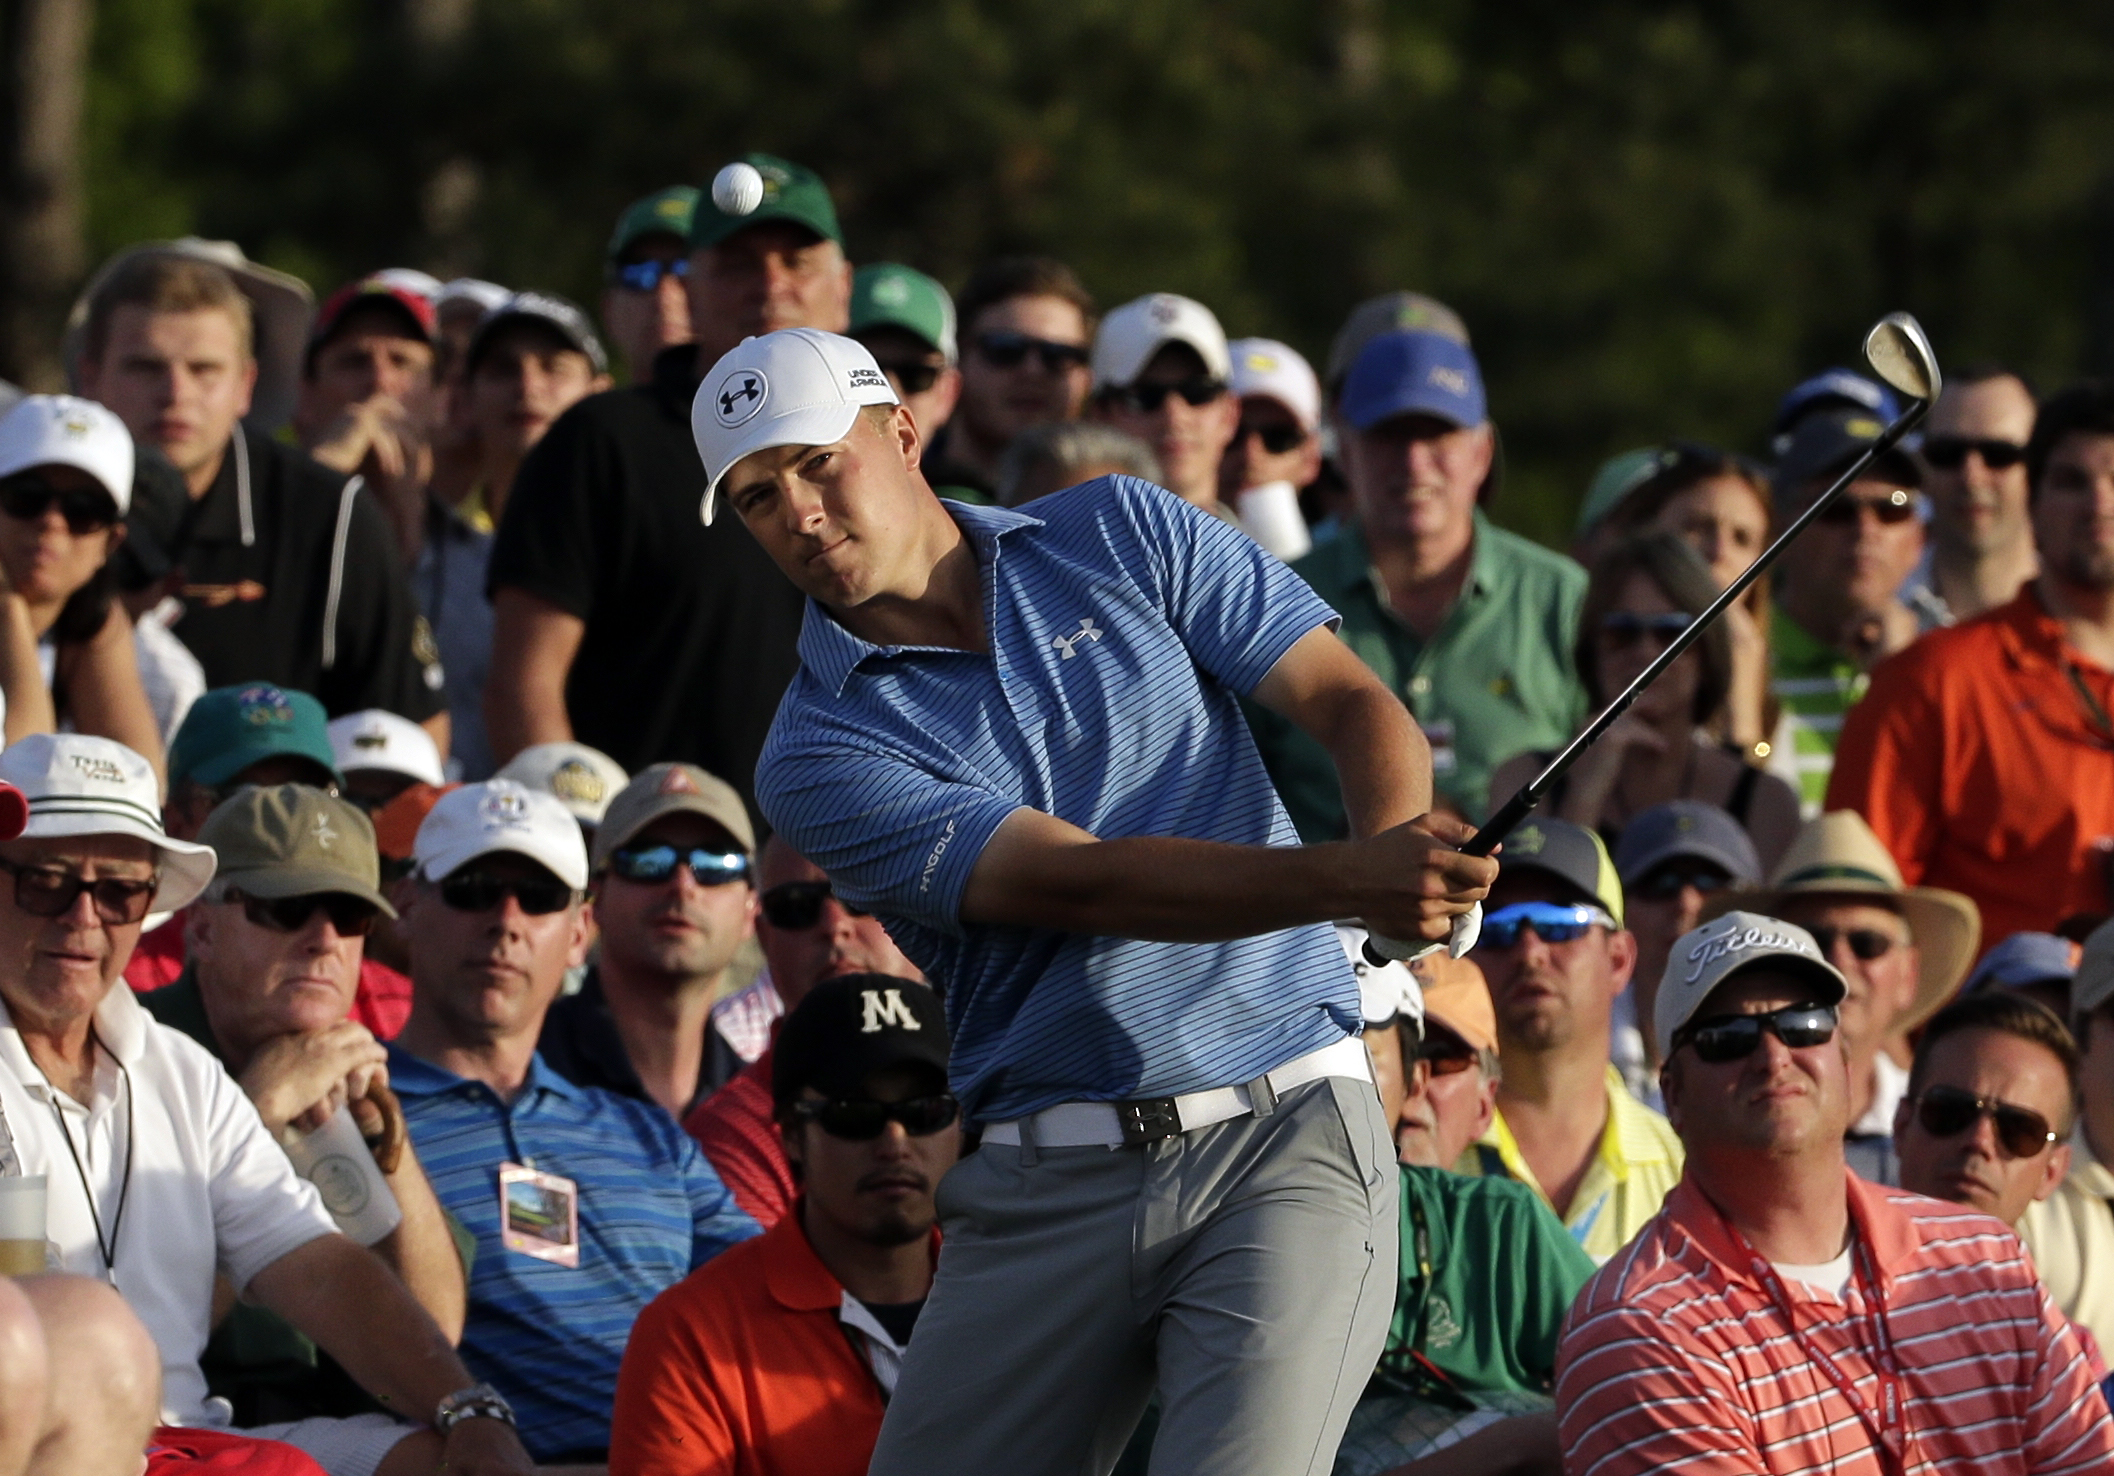 Jordan Spieth hits out of the gallery on the 18th hole during the third round of the Masters golf tournament Saturday, April 11, 2015, in Augusta, Ga.